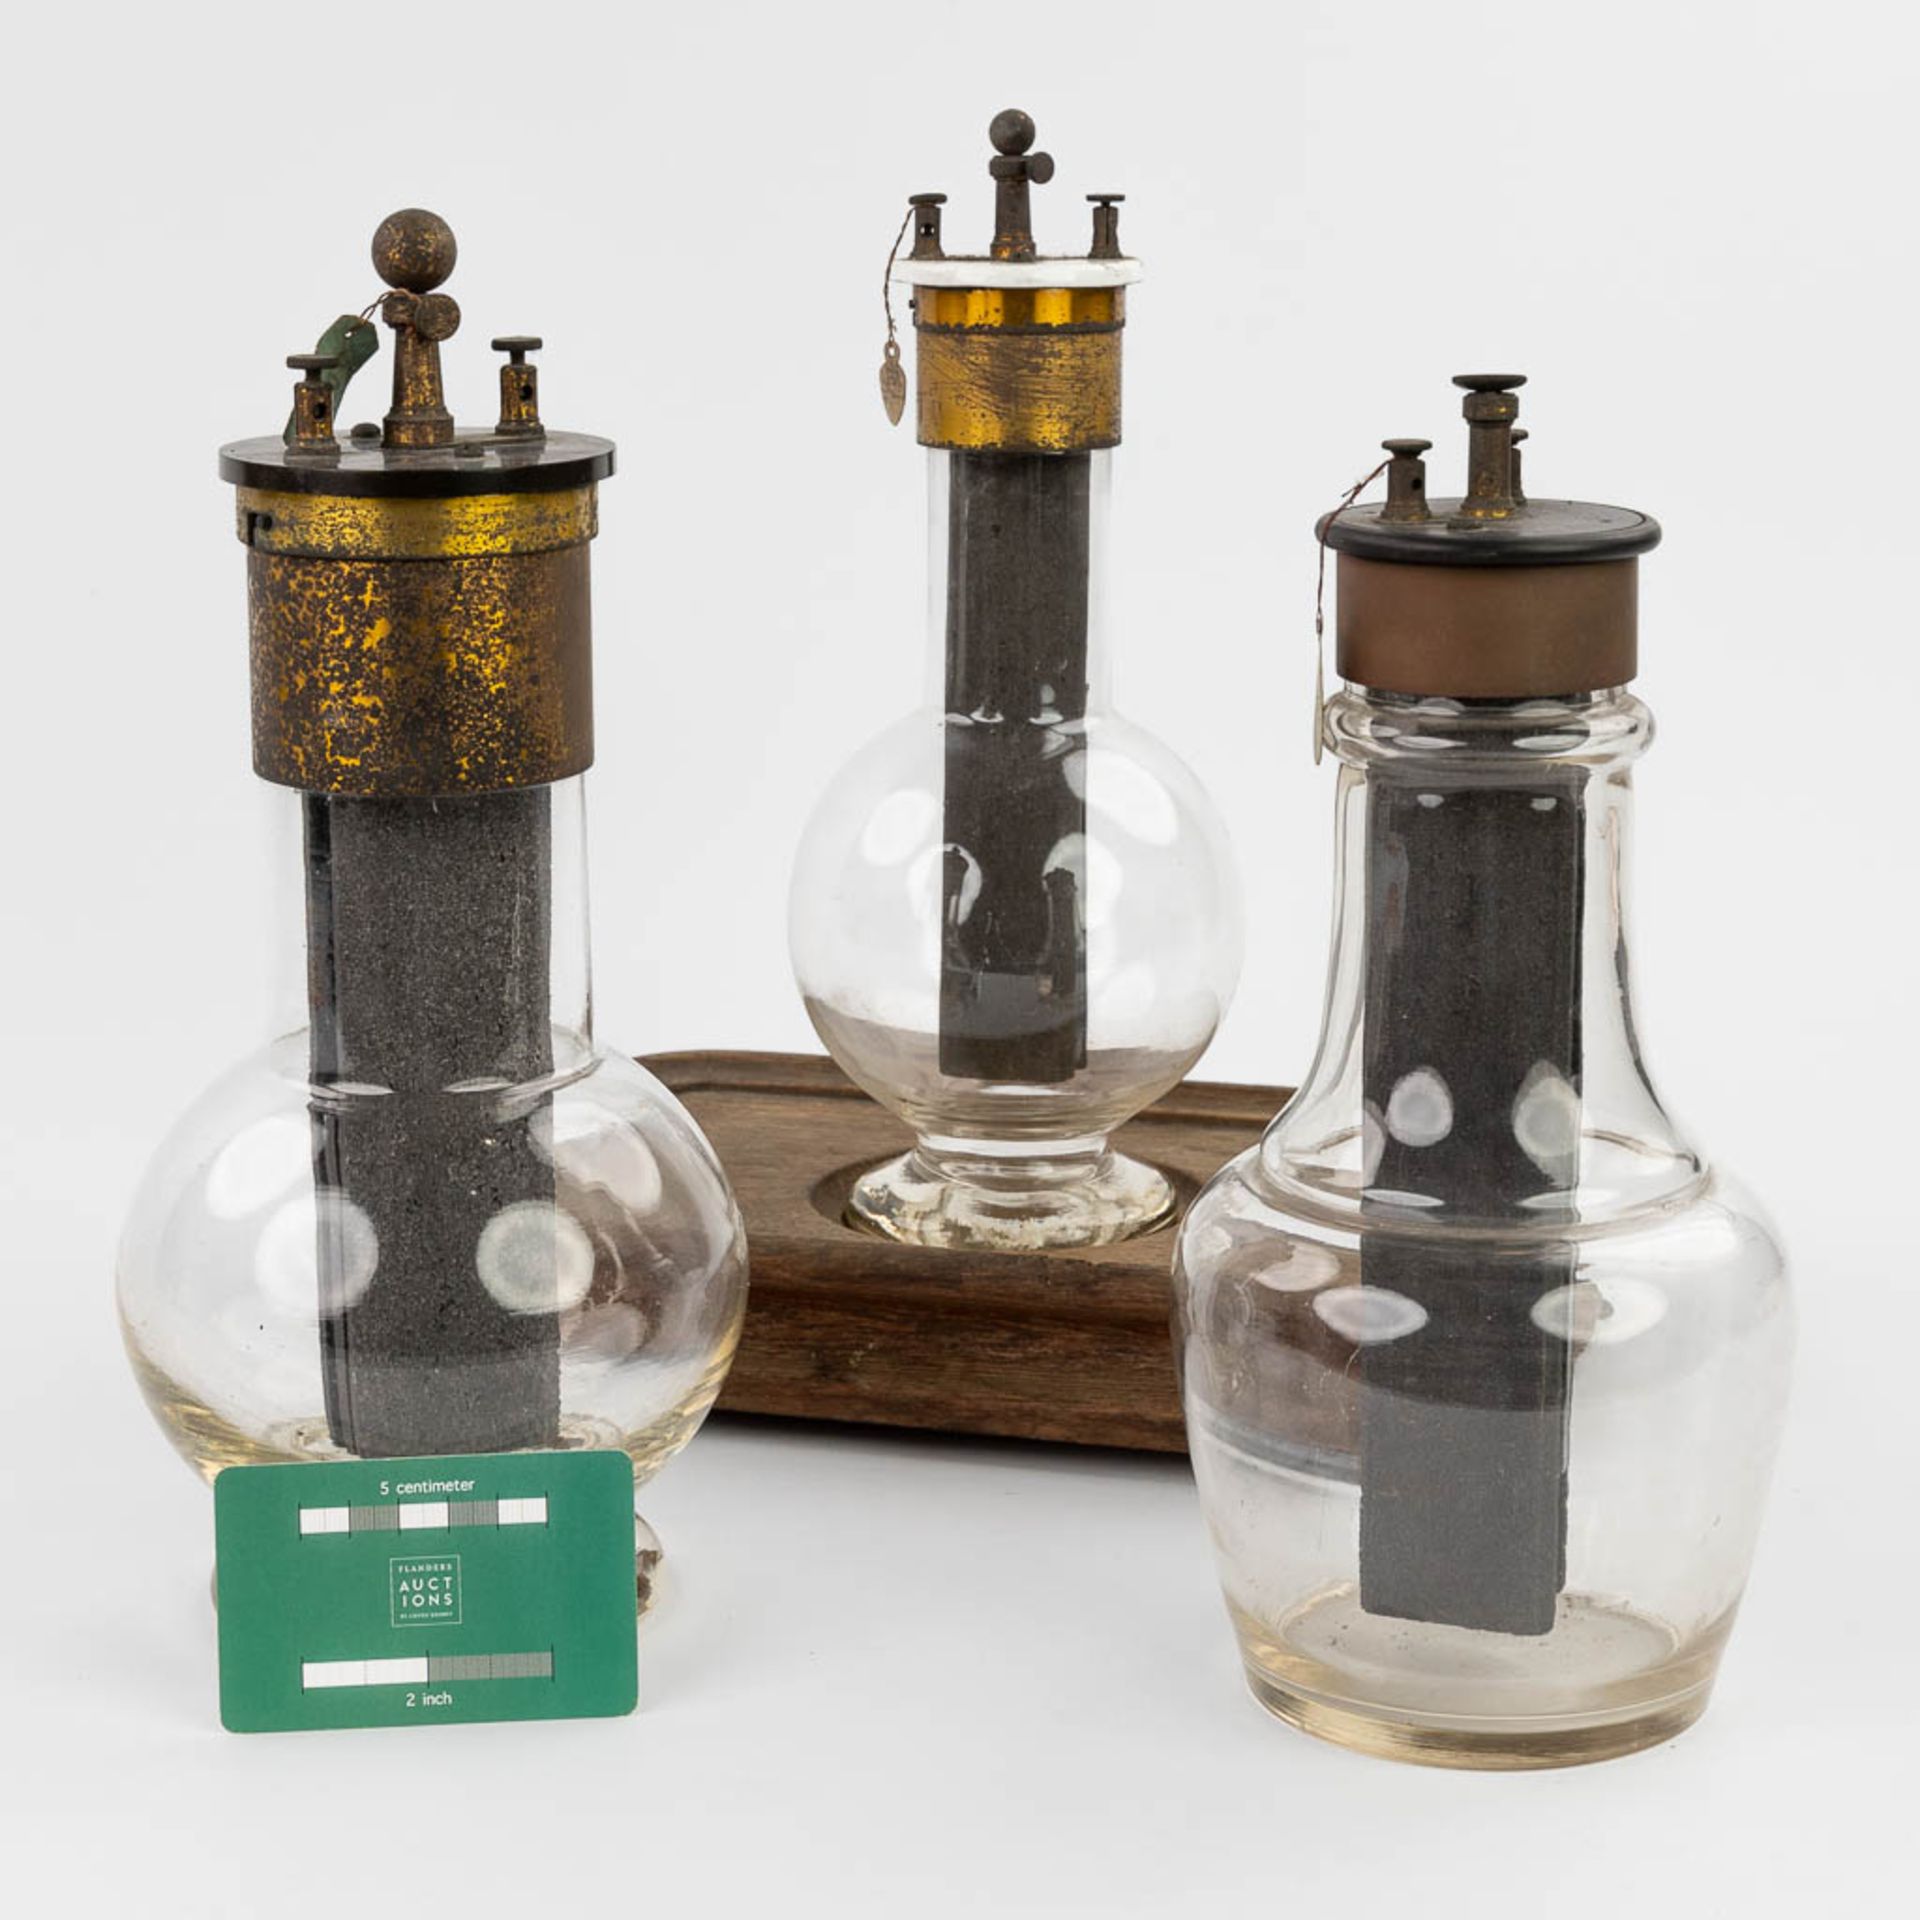 A collection of 3 'Grenet Cell' batteries made of glass. (H:30 x D:14 cm) - Image 3 of 14